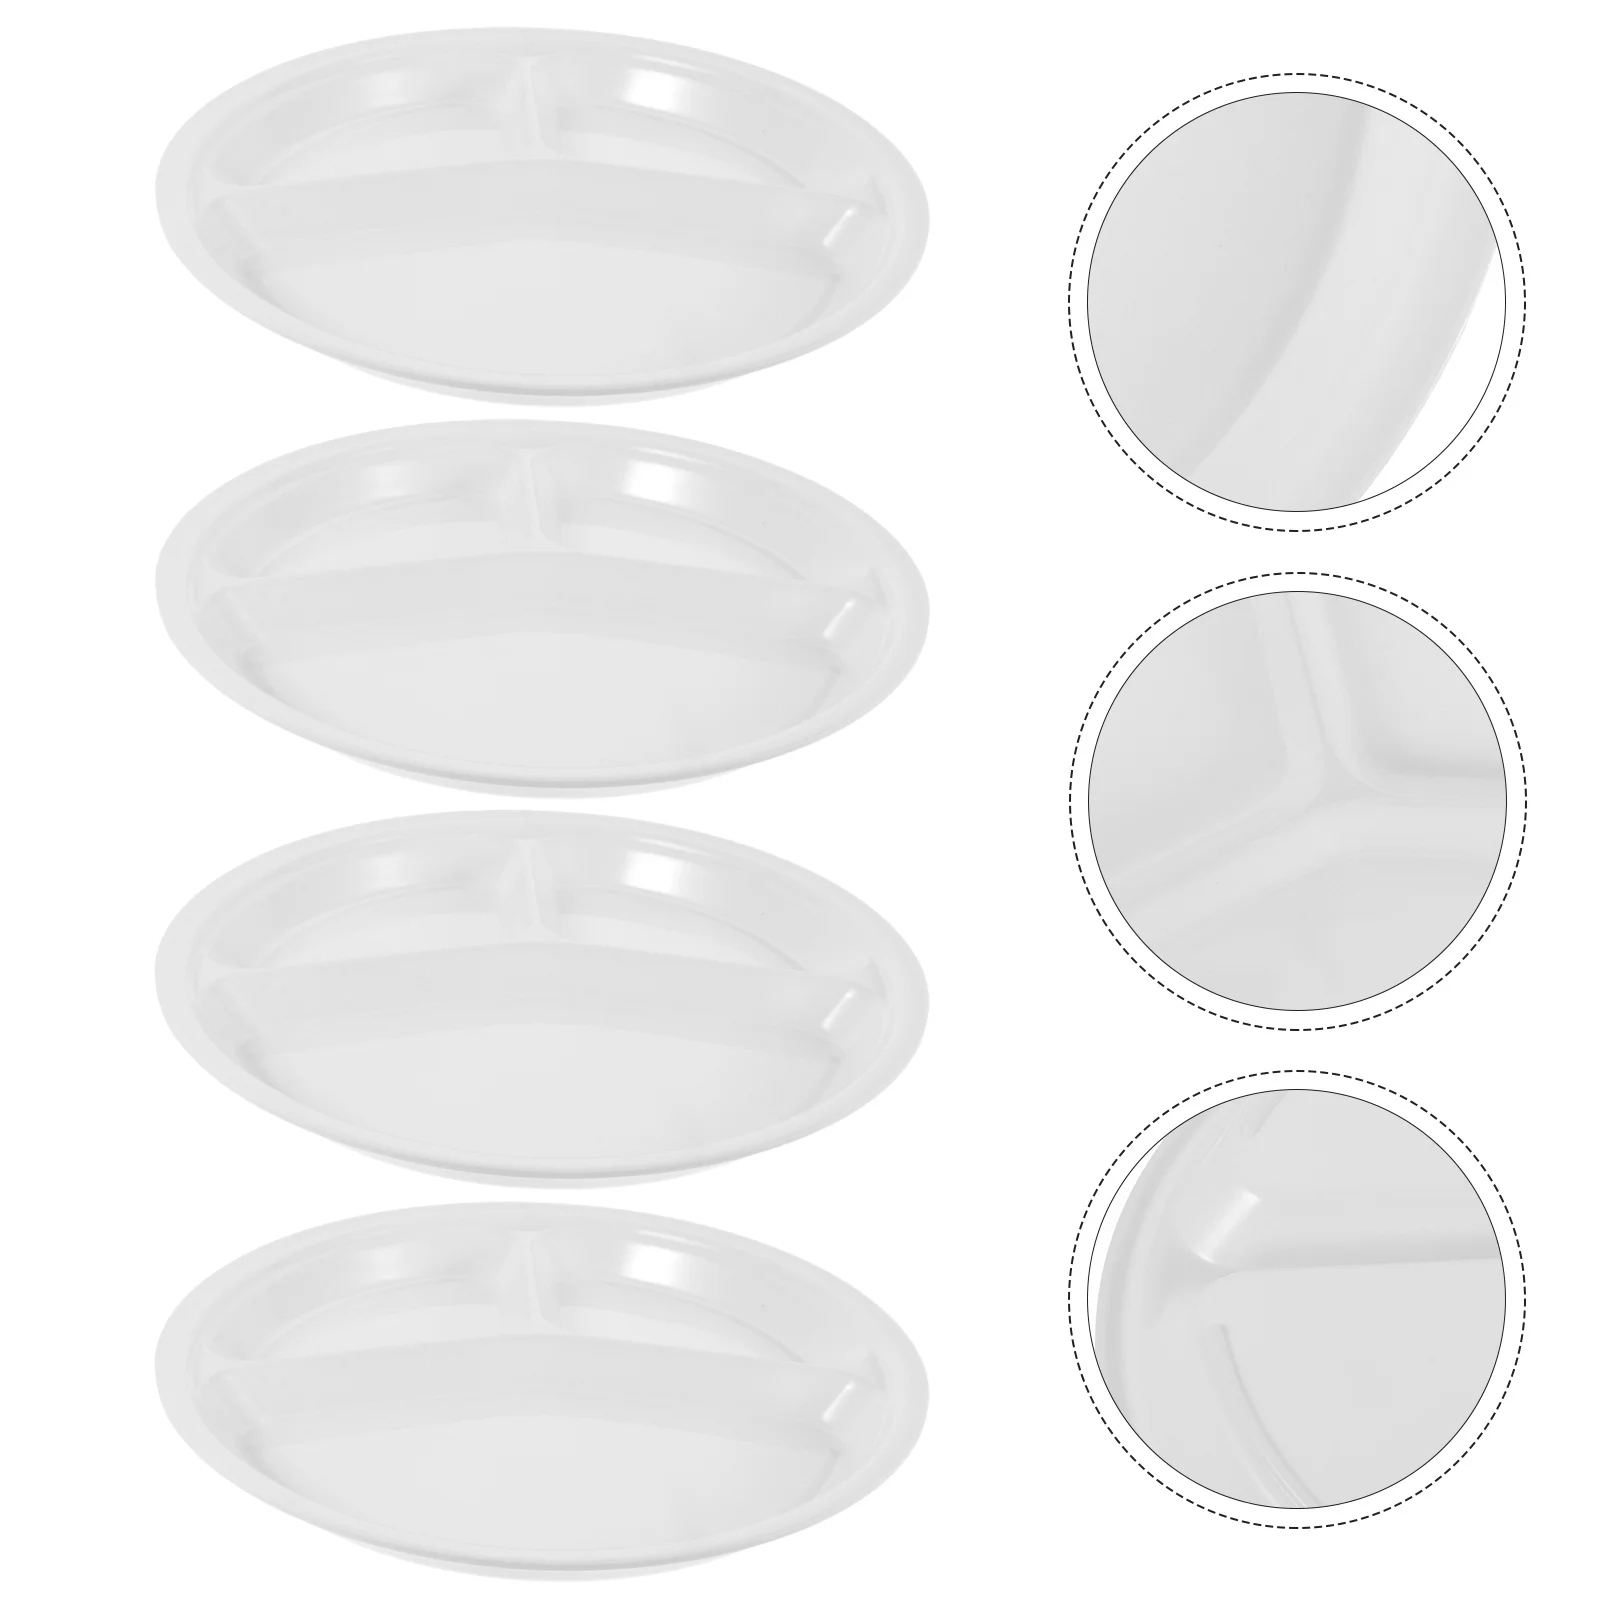 

Tray Plate Sushi Portion Control Sashimi Plates Serving Snack Kids Melamine Platter Divided Dessert Board Cheese Weight Saucer